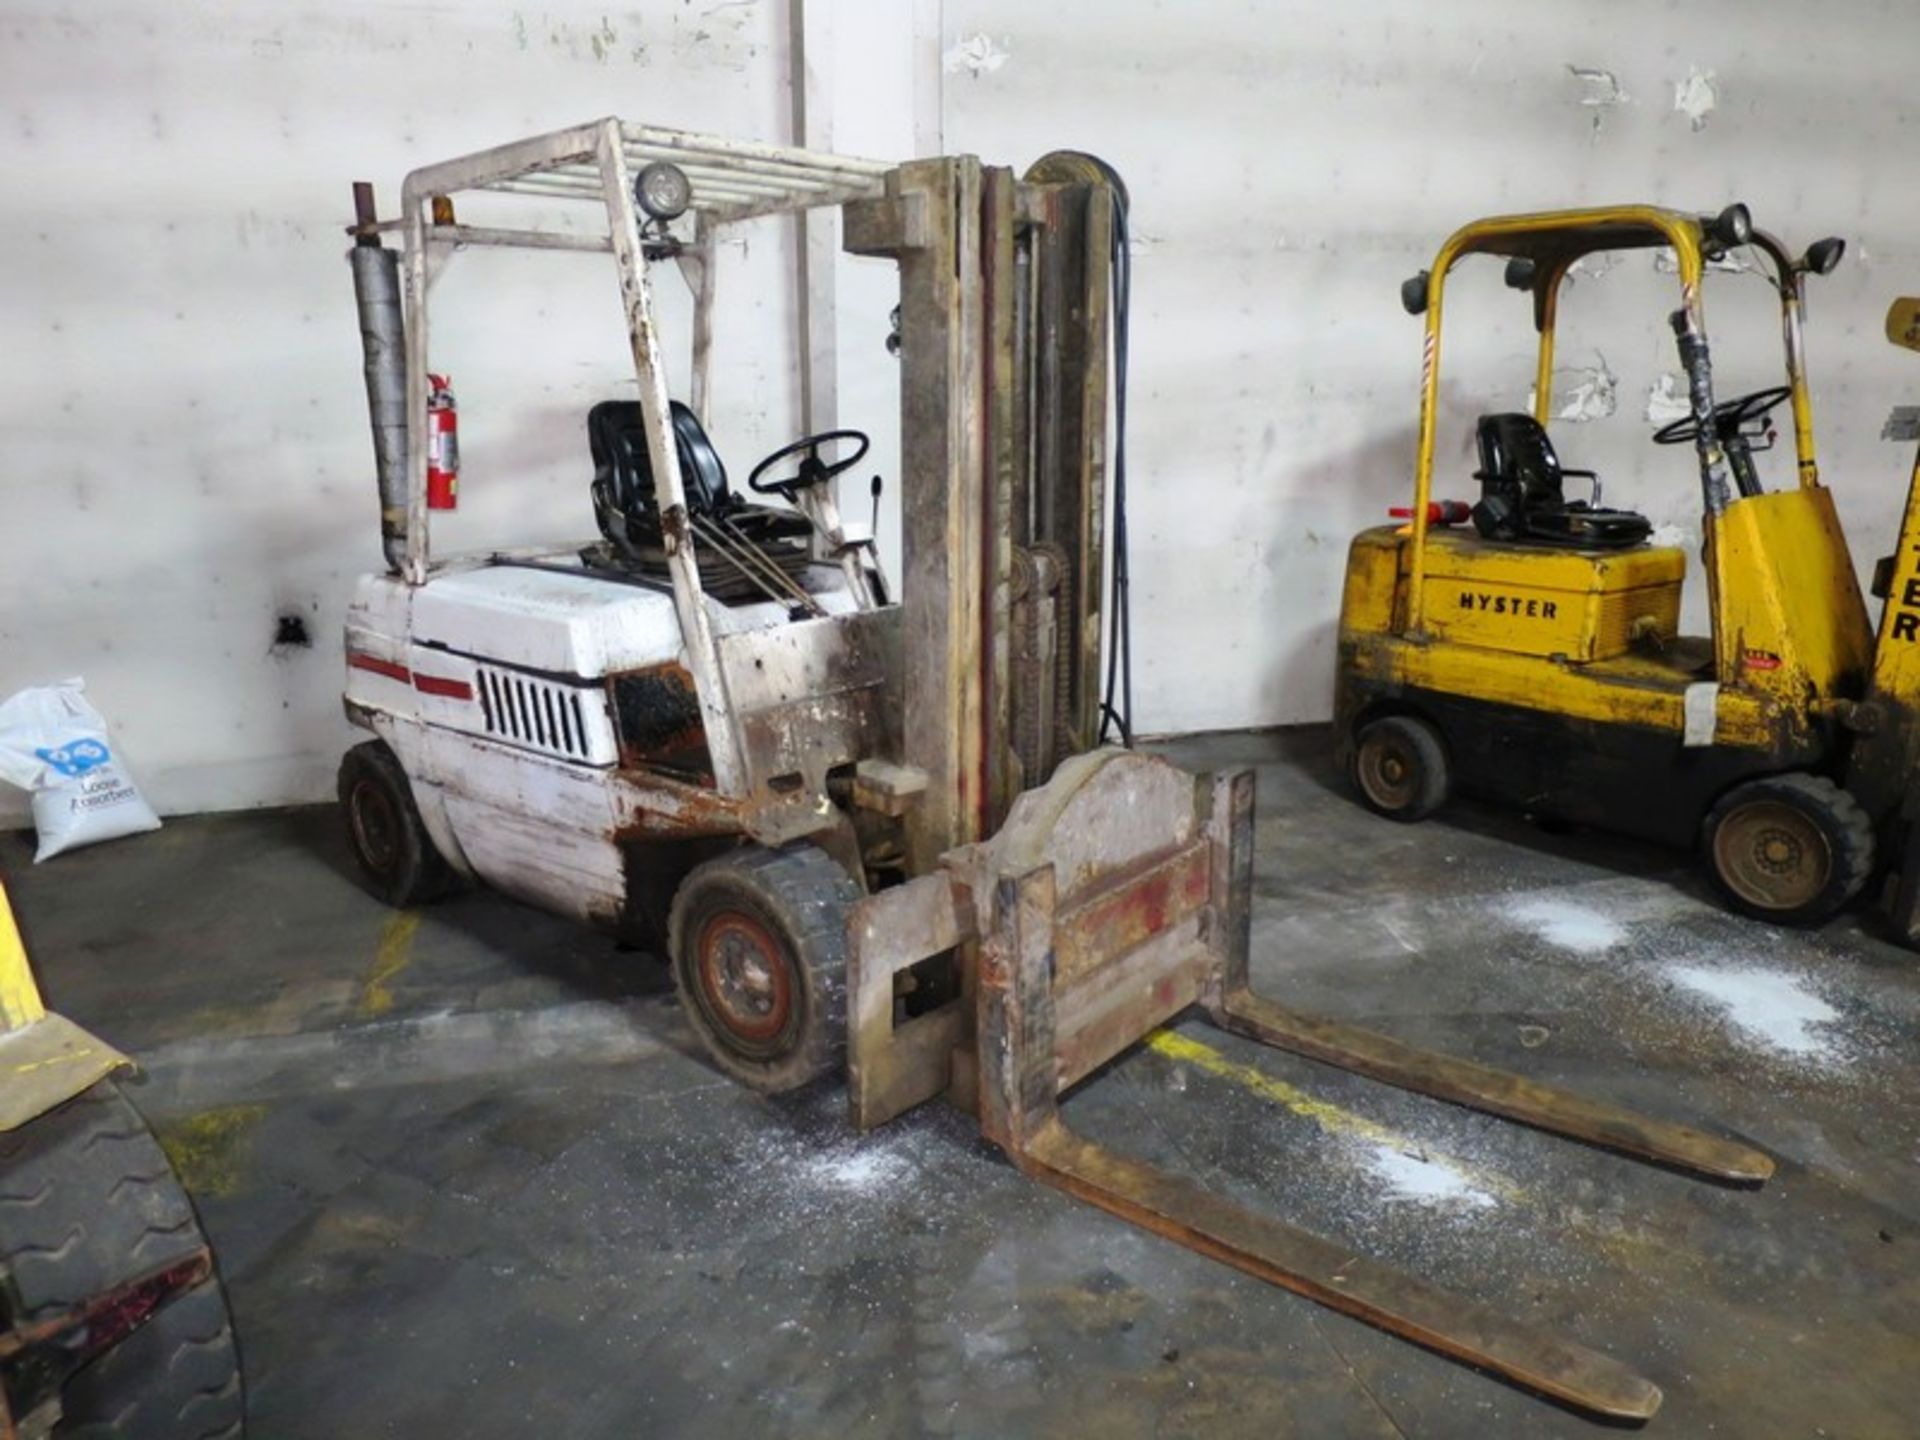 8,000 lbs. Baker Model B80PD Lift Truck S/N: 331-30501-0730, Max Height 170", 1983, Has Rotator with - Image 2 of 3